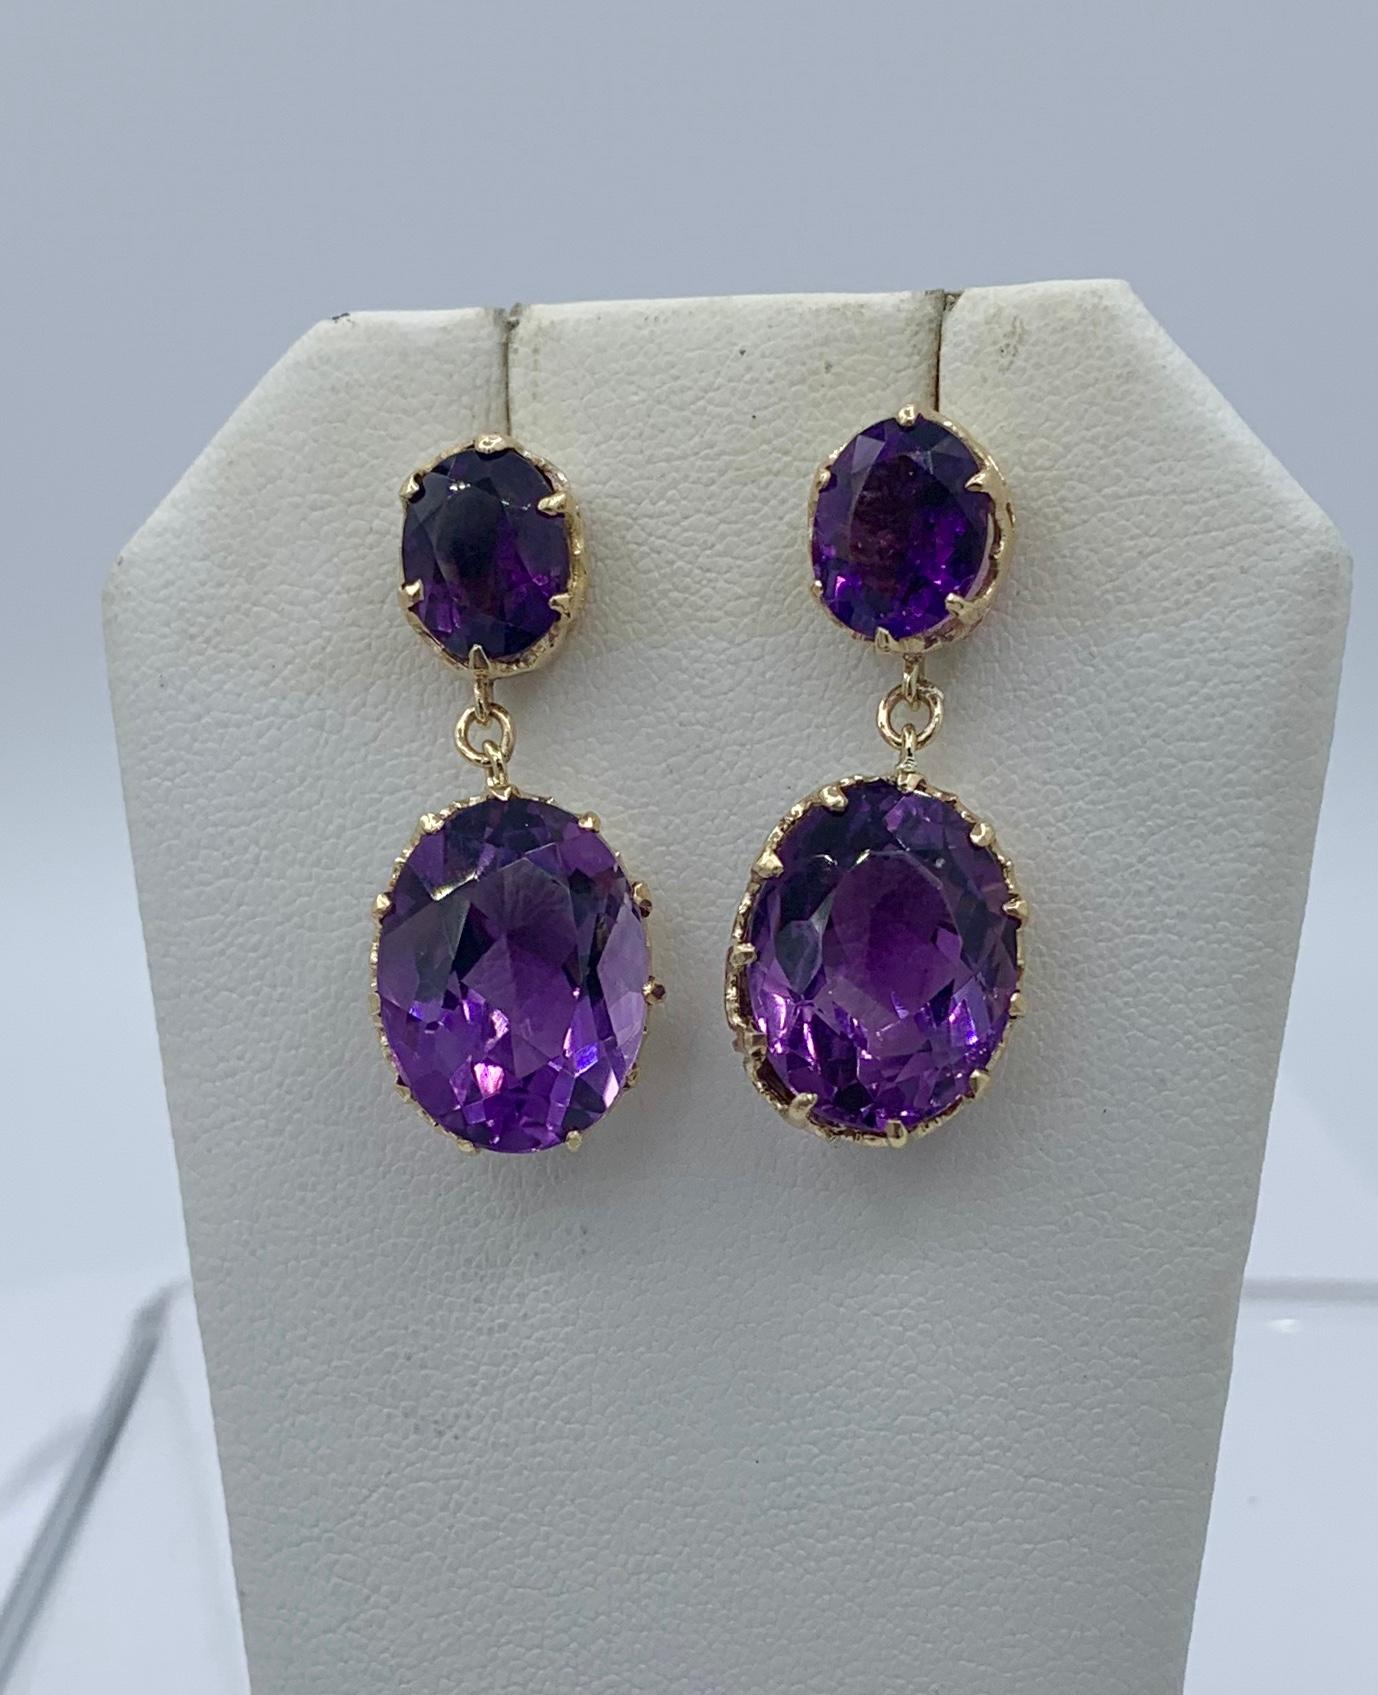 A STUNNING PAIR OF EARRINGS WITH 28 CARATS OF ANTIQUE SIBERIAN AMETHYSTS.  THE DROP DANGLE PENDANT EARRINGS ARE 1 3/8 INCHES IN LENGTH.  THE AMETHYSTS ARE SET IN BEAUTIFUL 14 KARAT GOLD WITH A CROWN MOTIF SETTING ENCIRCLING THE JEWELS.  THE CUT,